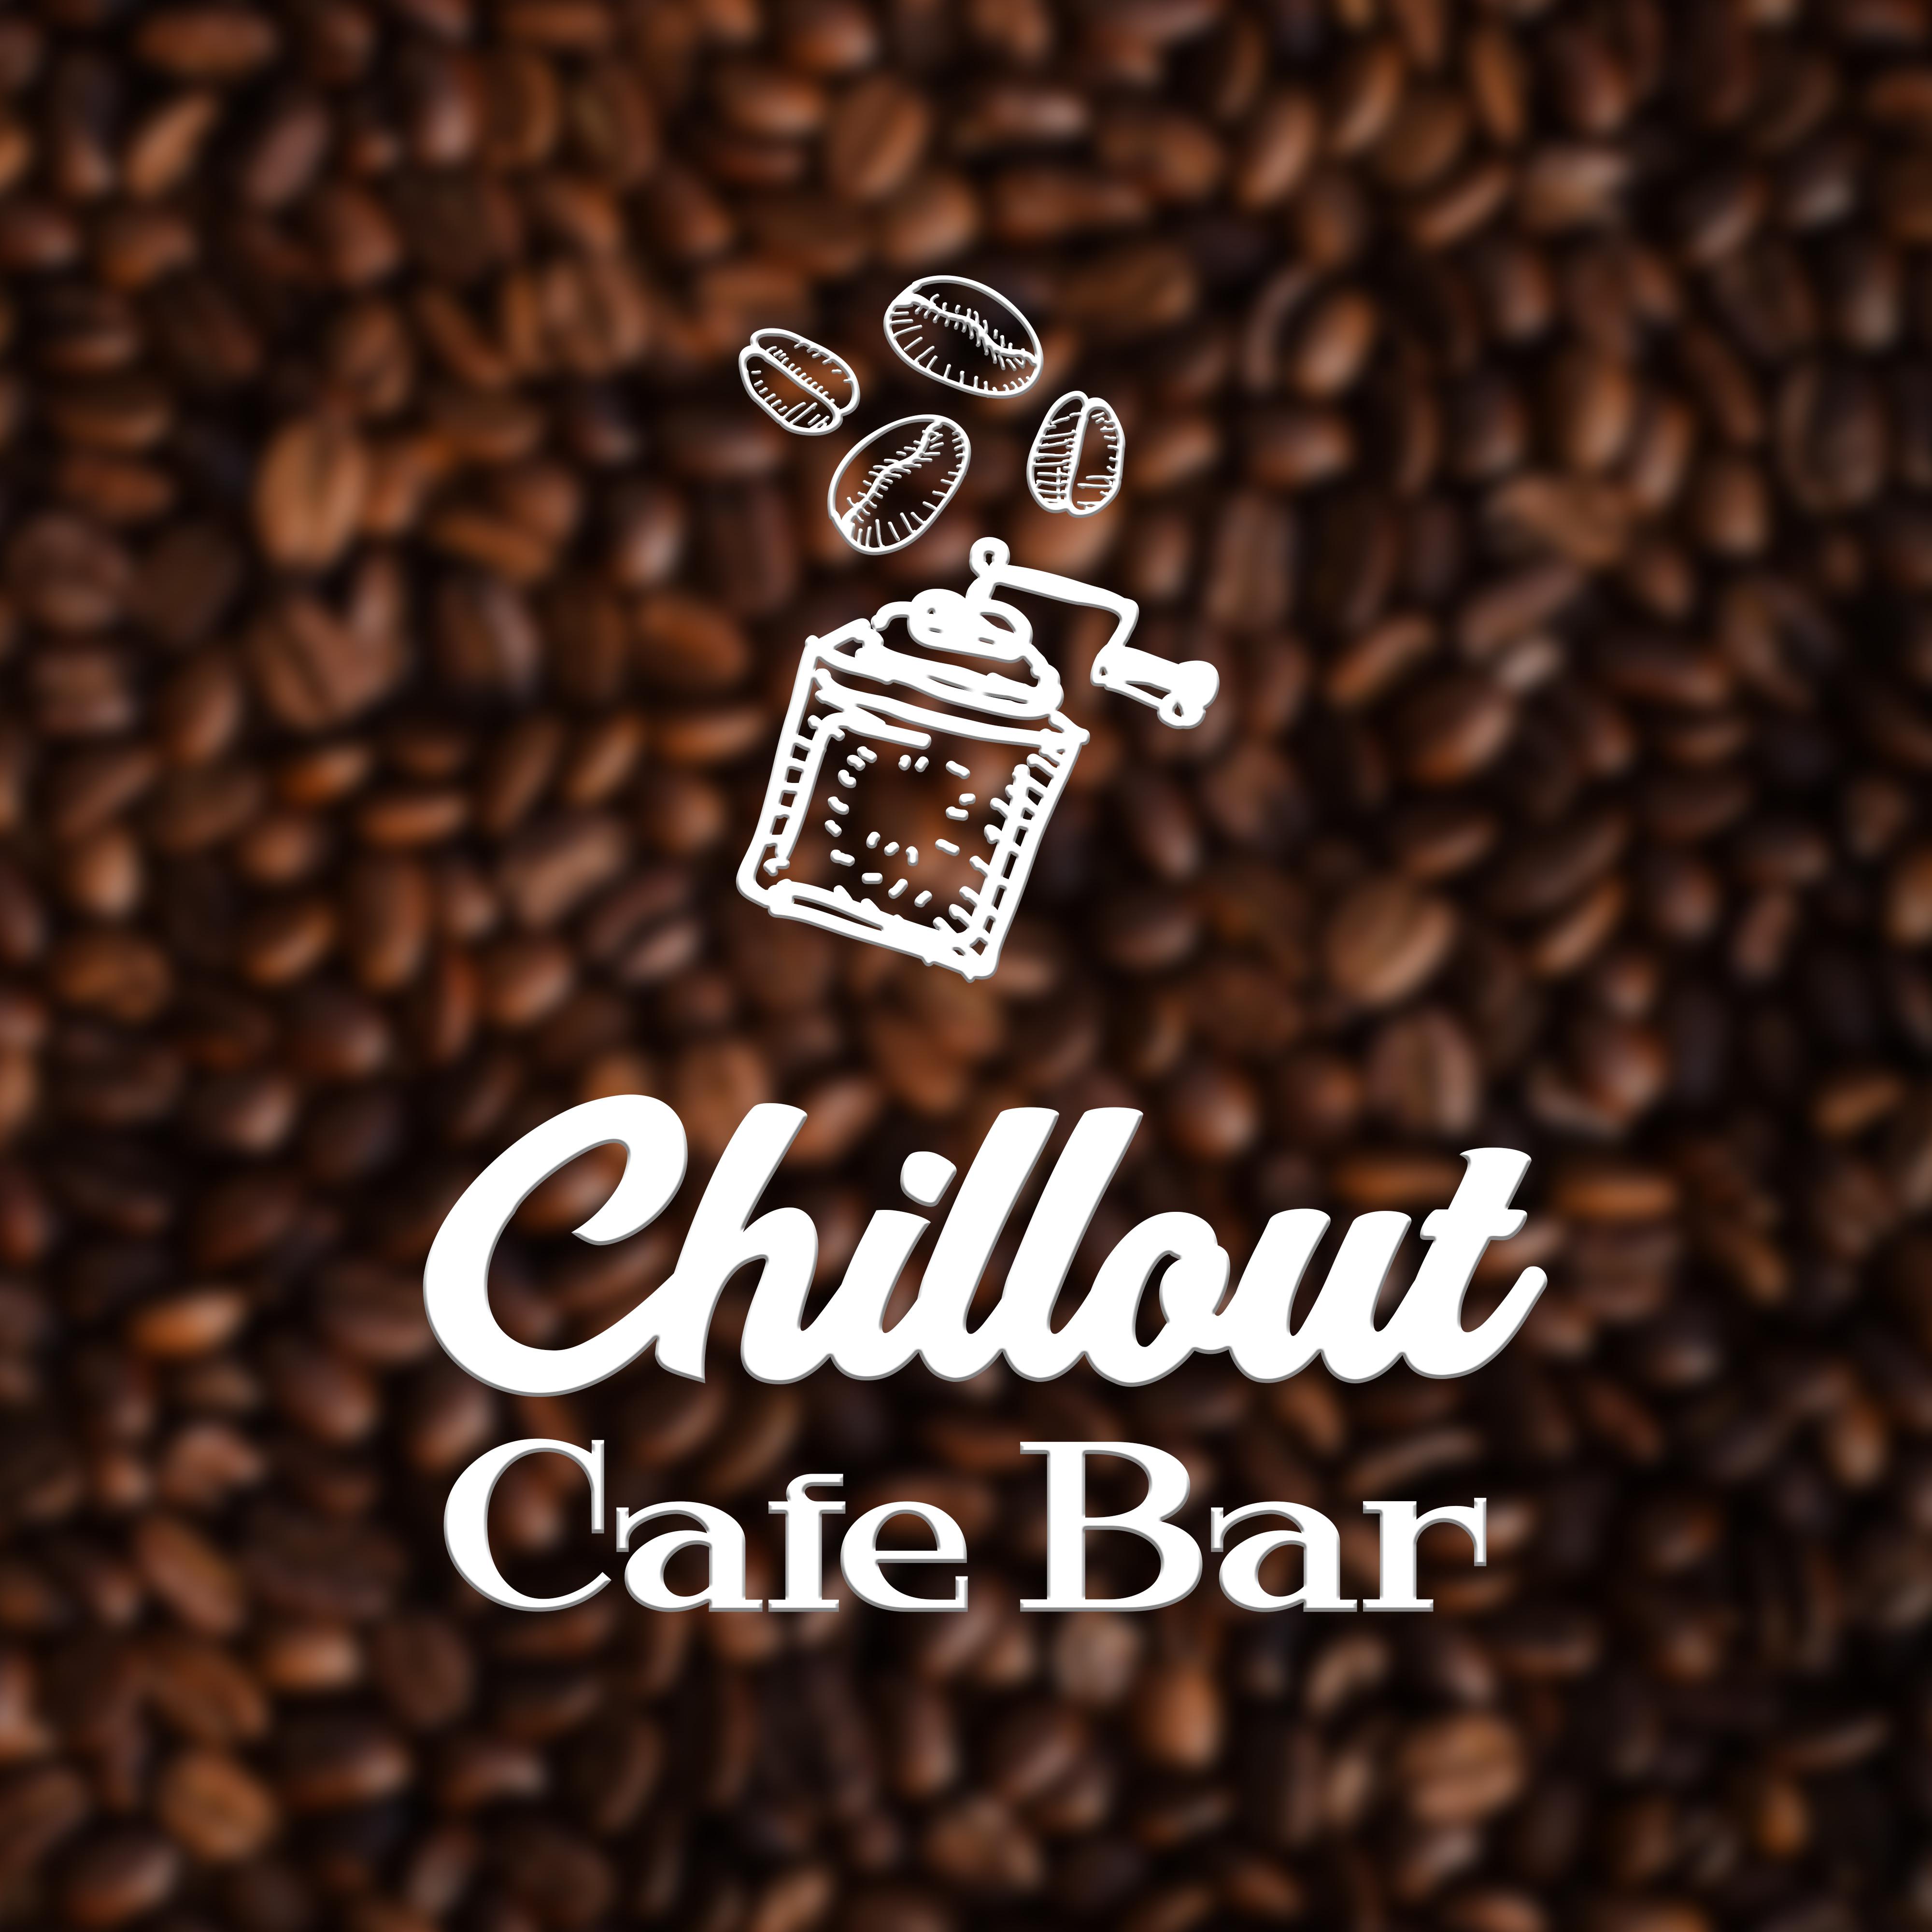 Chillout Cafe Bar  Relax  Chill, Chillout Music for Cafe, Coffee Talk, Smooth Vibes